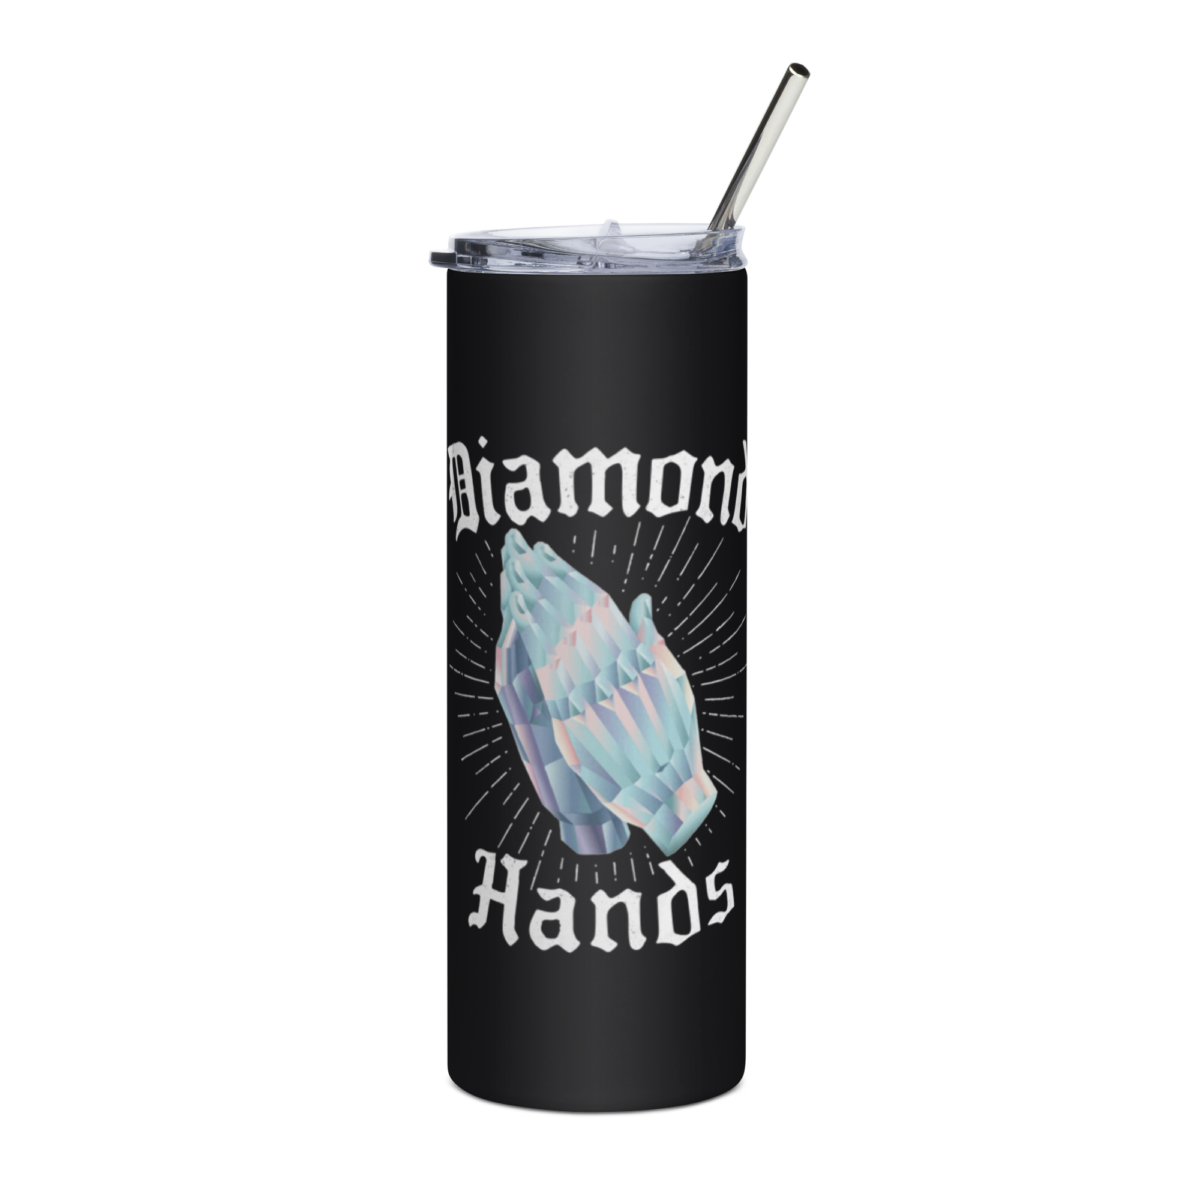 stainless steel tumbler black front 63132d4dc6a40 - Diamond Hands Stainless Steel Tumbler